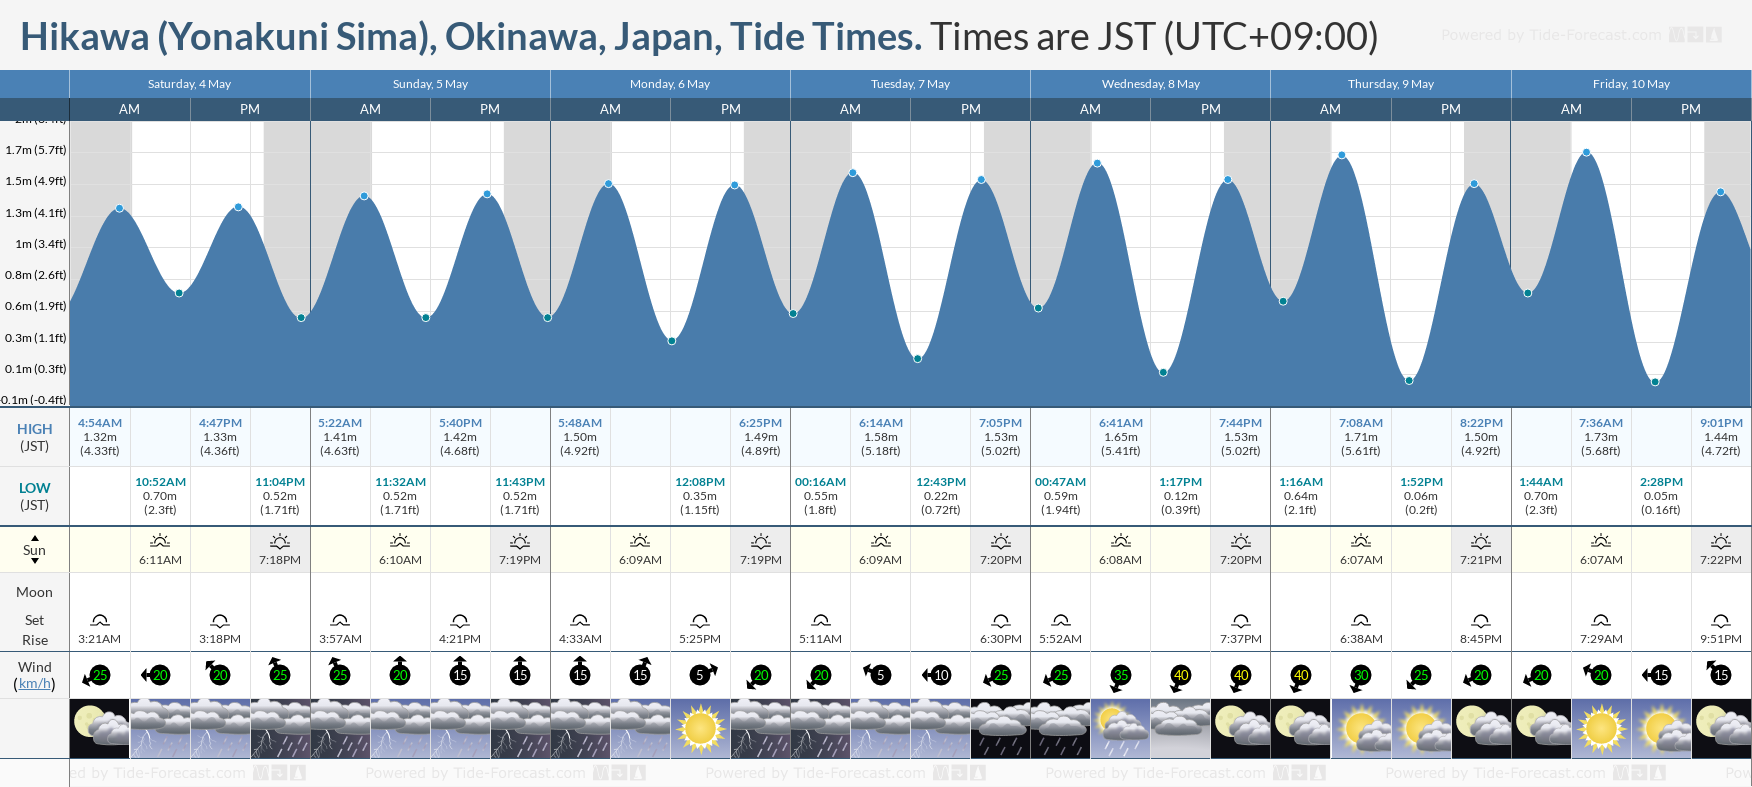 Hikawa (Yonakuni Sima), Okinawa, Japan Tide Chart including high and low tide times for the next 7 days